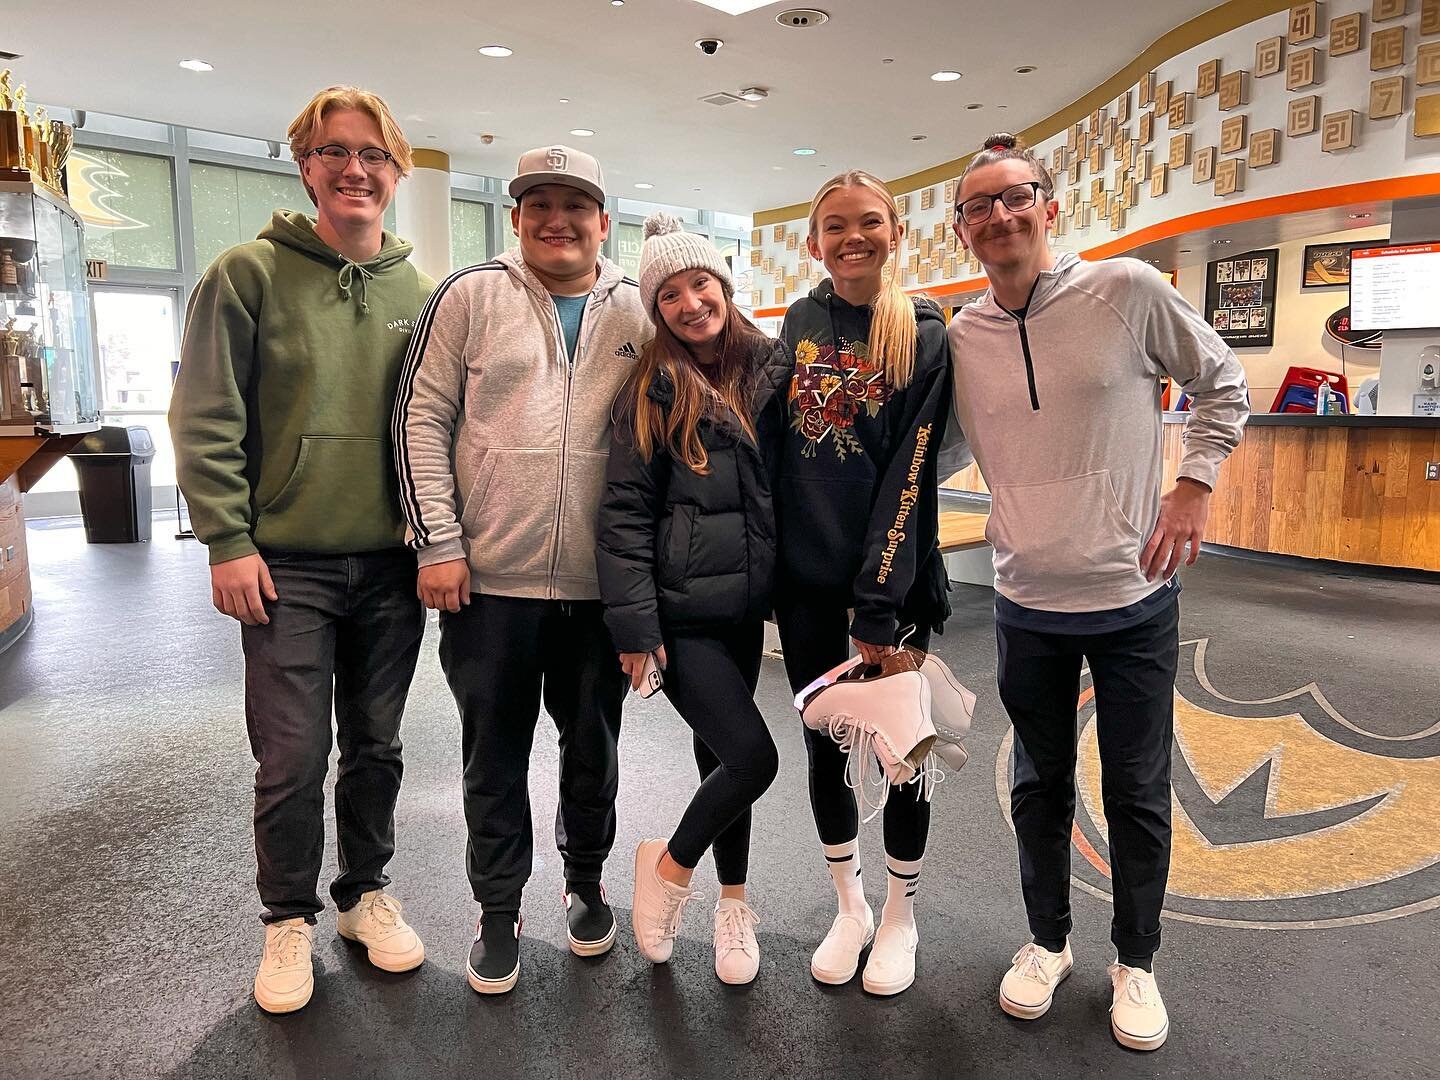 ❤️❤️❤️ When you find out your adult children get together on a random Sunday to go ice skating!  This melts my heart a little&hellip; to know that skating is still in their soul. To see them share a little of their childhood with their significant ot